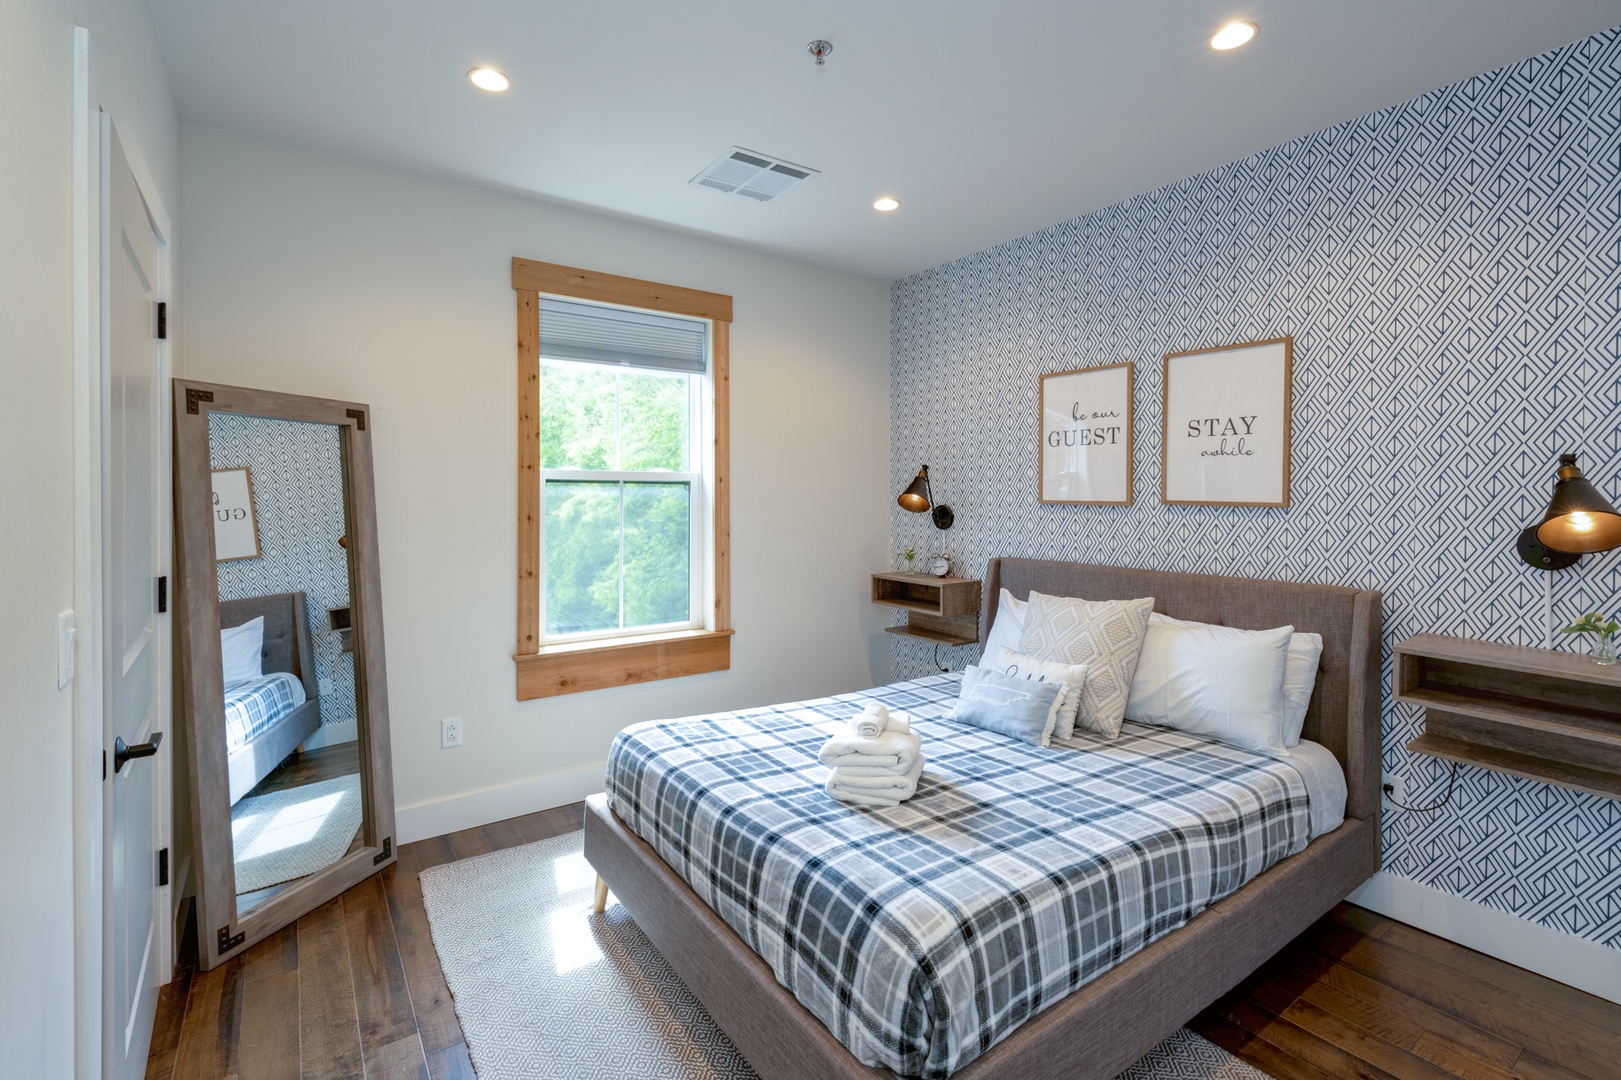 After a day exploring the Music City, retreat to your very own queen bedroom